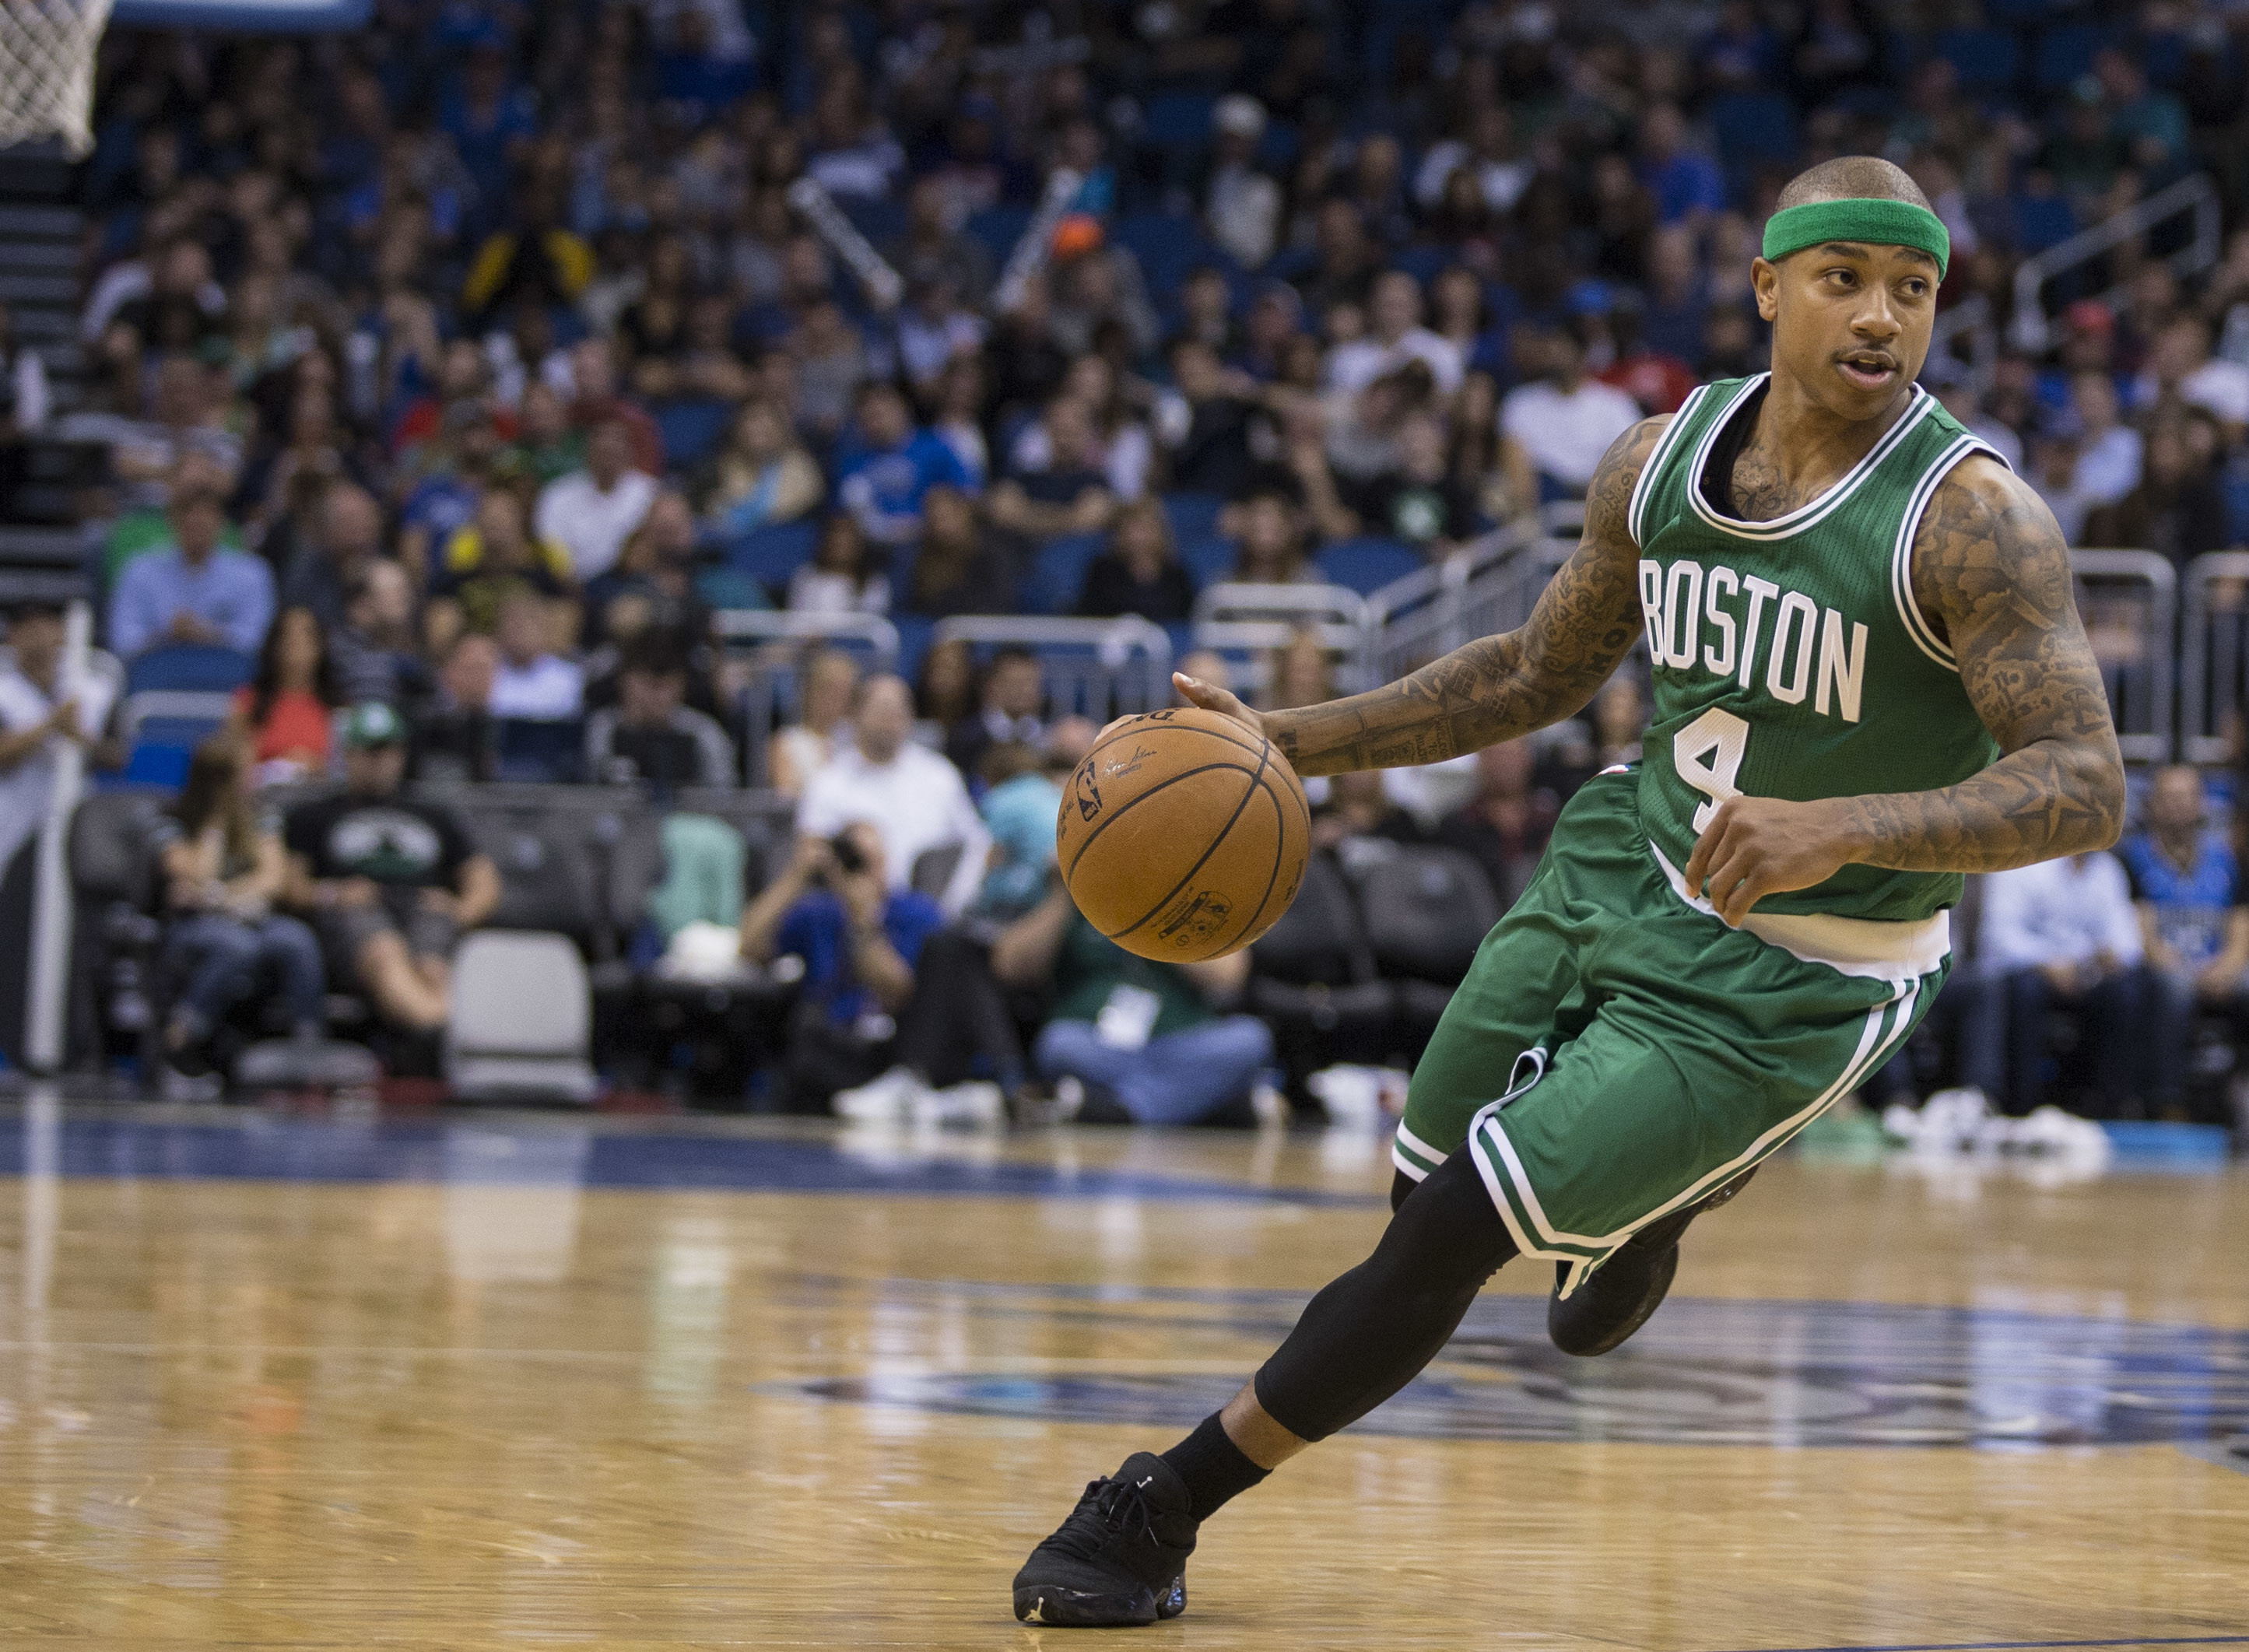 2890x2123 Isaiah Thomas with the dribble.